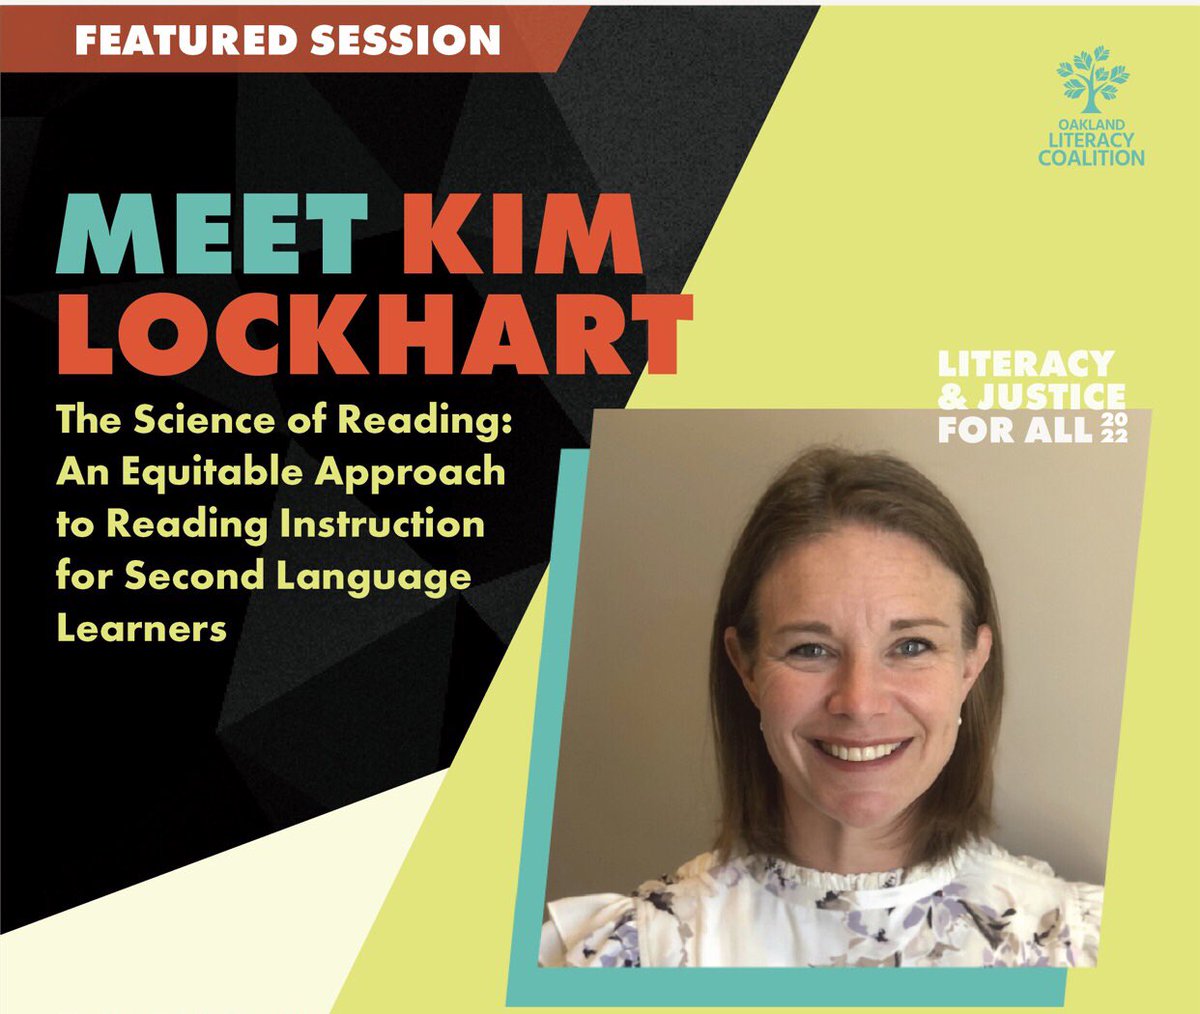 Thank you @OaklandReads for inviting me to do a Virtual workshop at next week’s #LJ4All Symposium!

I will share how #ScienceOfReading has informed my L2 instruction & the practical, research-based strategies I use to ensure more equitable learning outcomes for my L2 Learners.